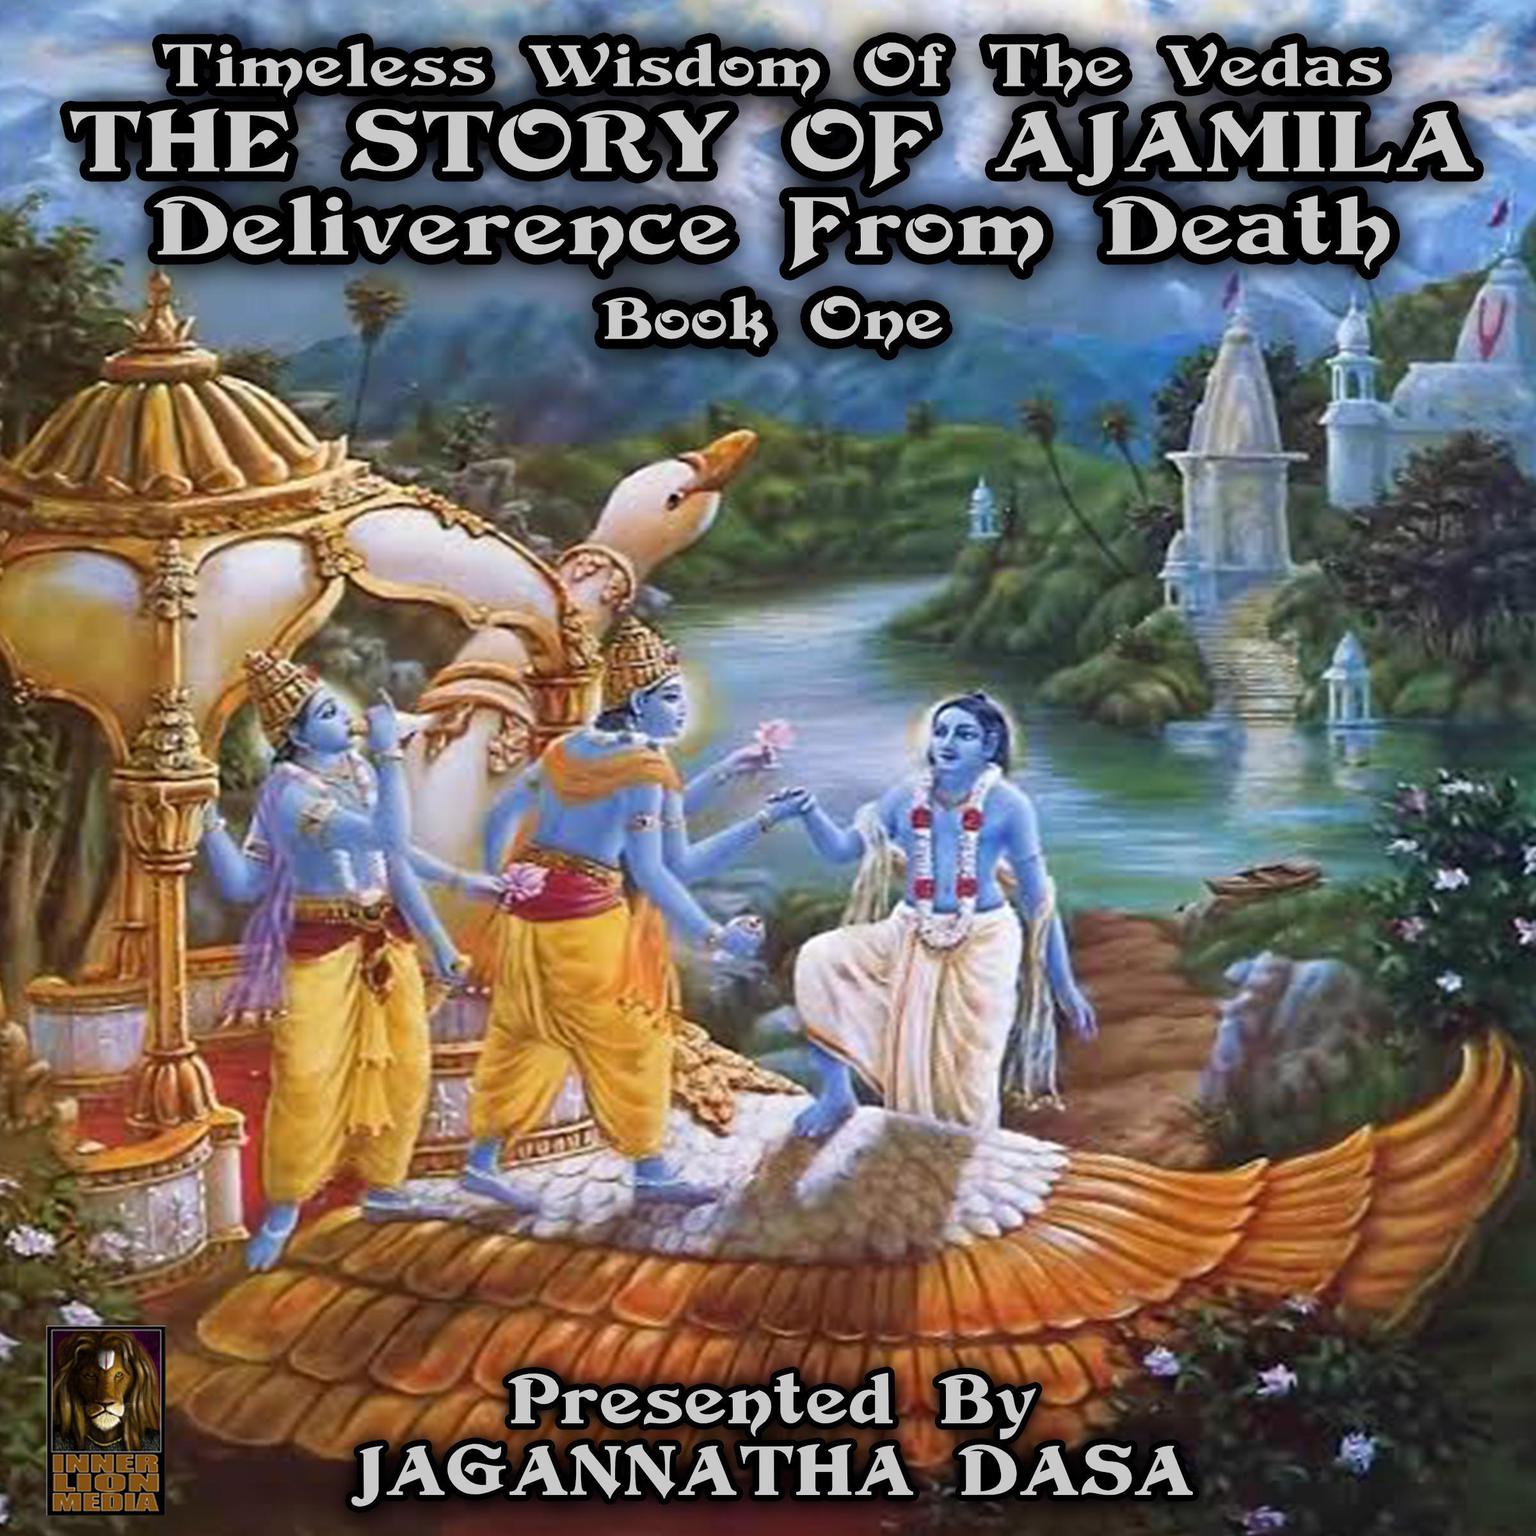 Timeless Wisdom Of The Vedas The Story Of Ajamila Deliverence From Death - Book One (Abridged) Audiobook, by unknown